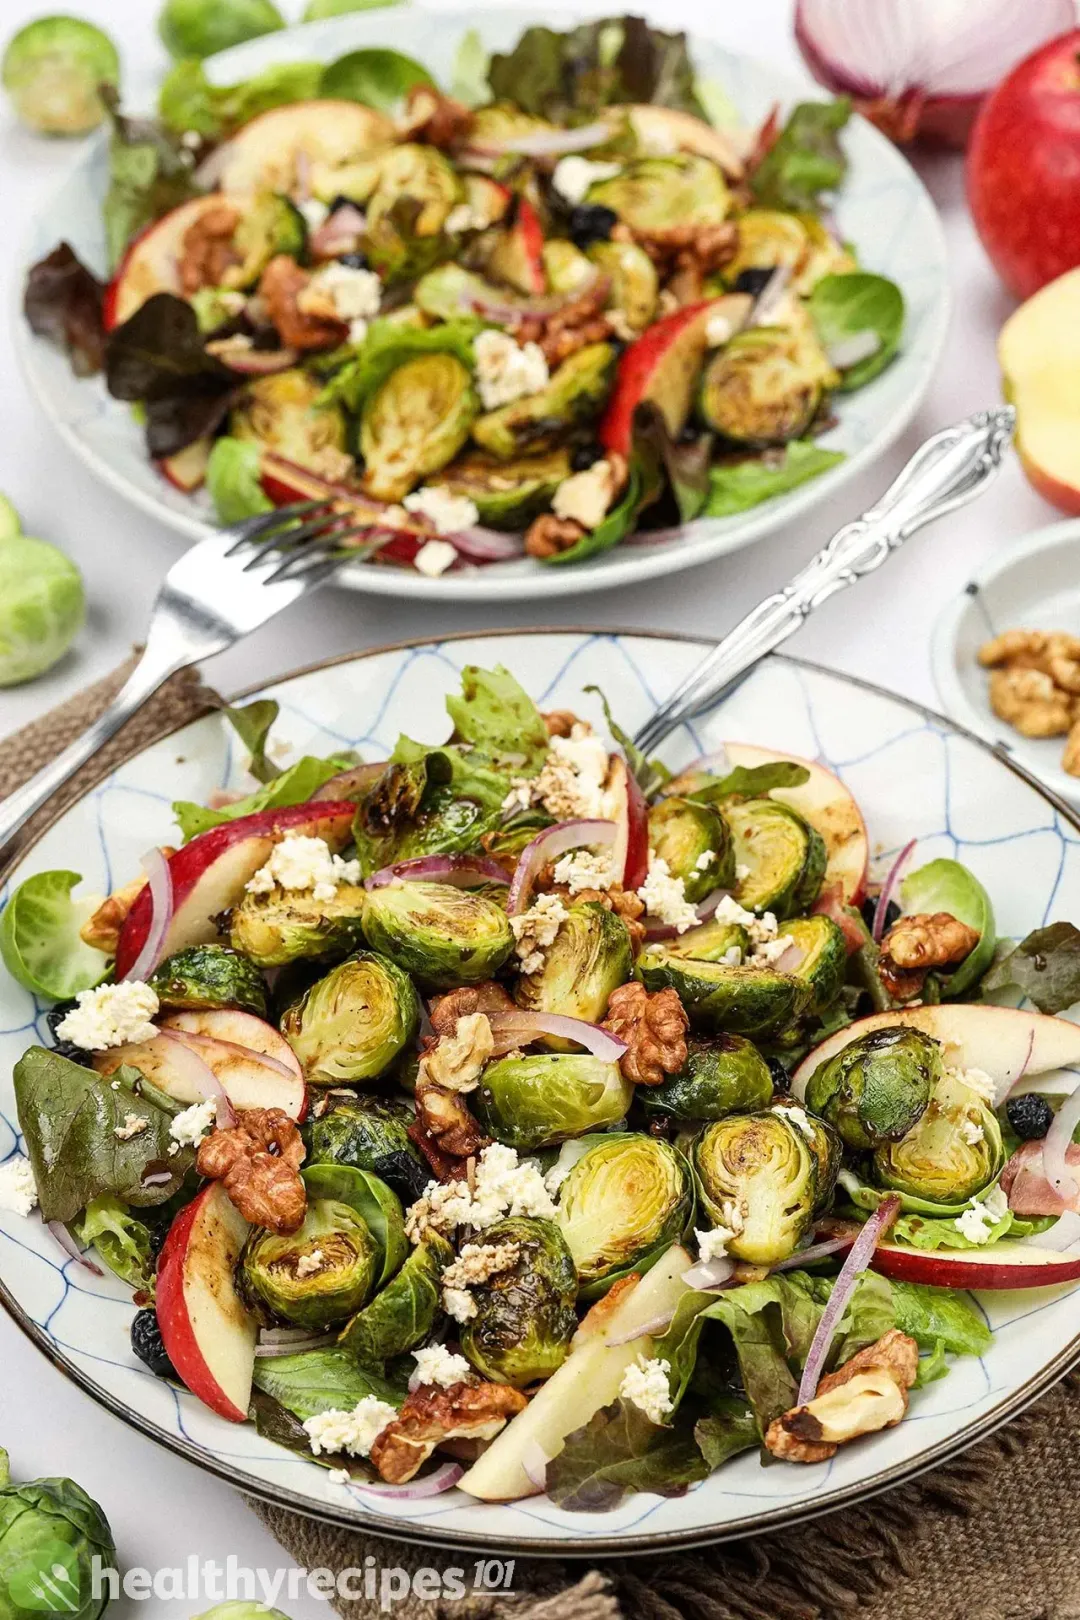 How to Choose the Brussels Sprouts for Grilled Brussels Sprout Salad